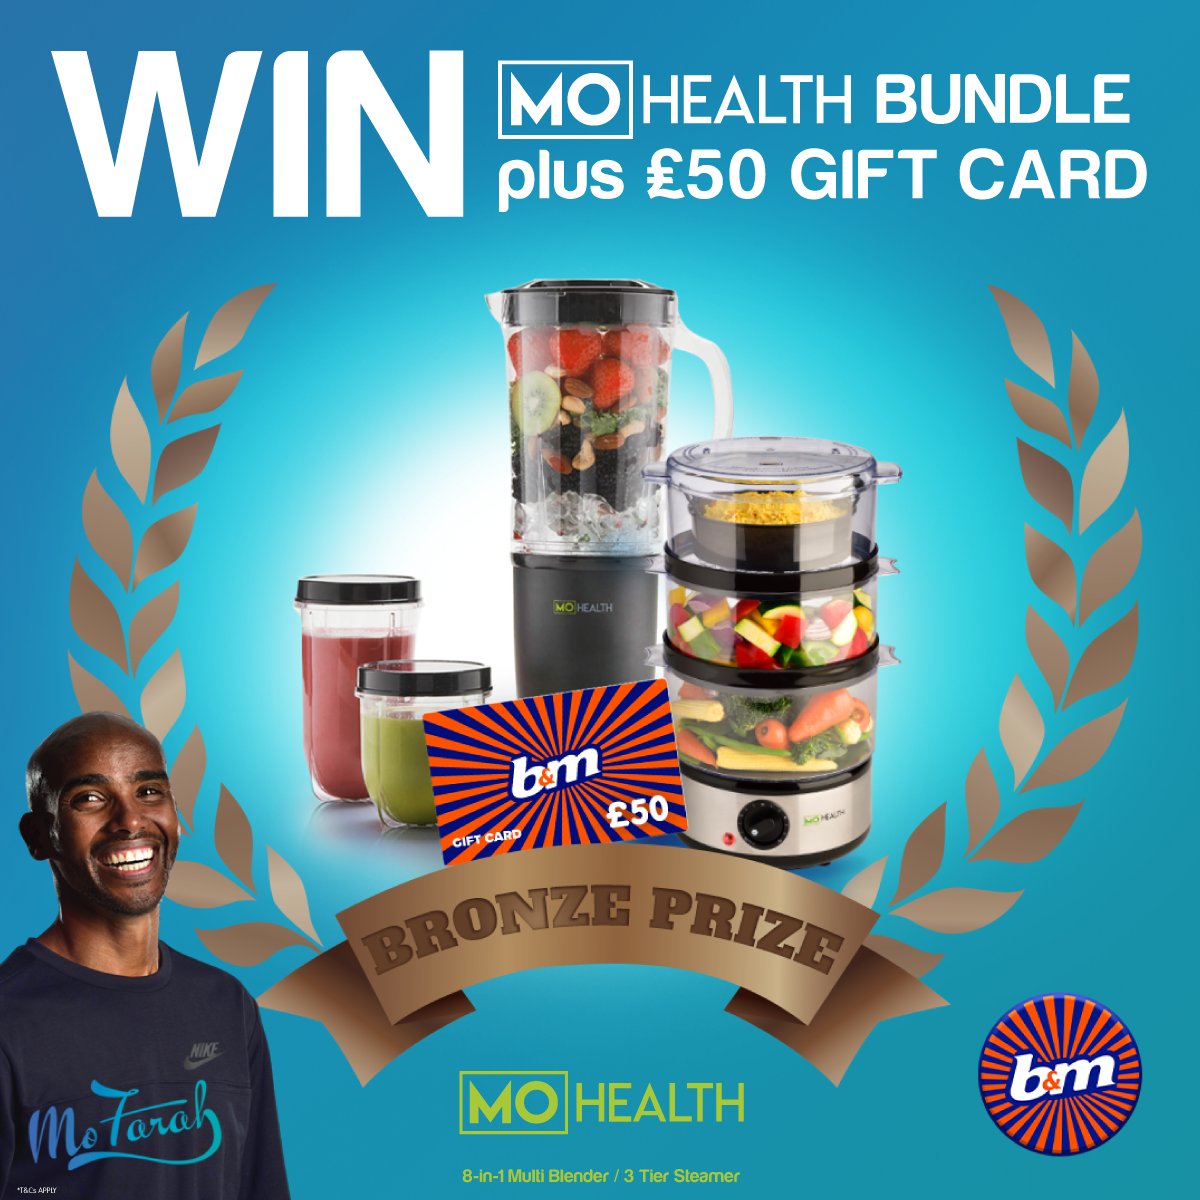 🥇#COMPETITION🏃

We've teamed with #MoFarah to give ONE chance to #WIN a bundle of 2 Products including 8-in-1 Multi Blender, 3 Tier Steamer and £50 B&M Gift Card.

Get mo-tivated & WIN #MoHealth prizes!

For a chance;

1) FLW & RT
2) COMMENT #MOHealth

Ends 9am 31/1/24